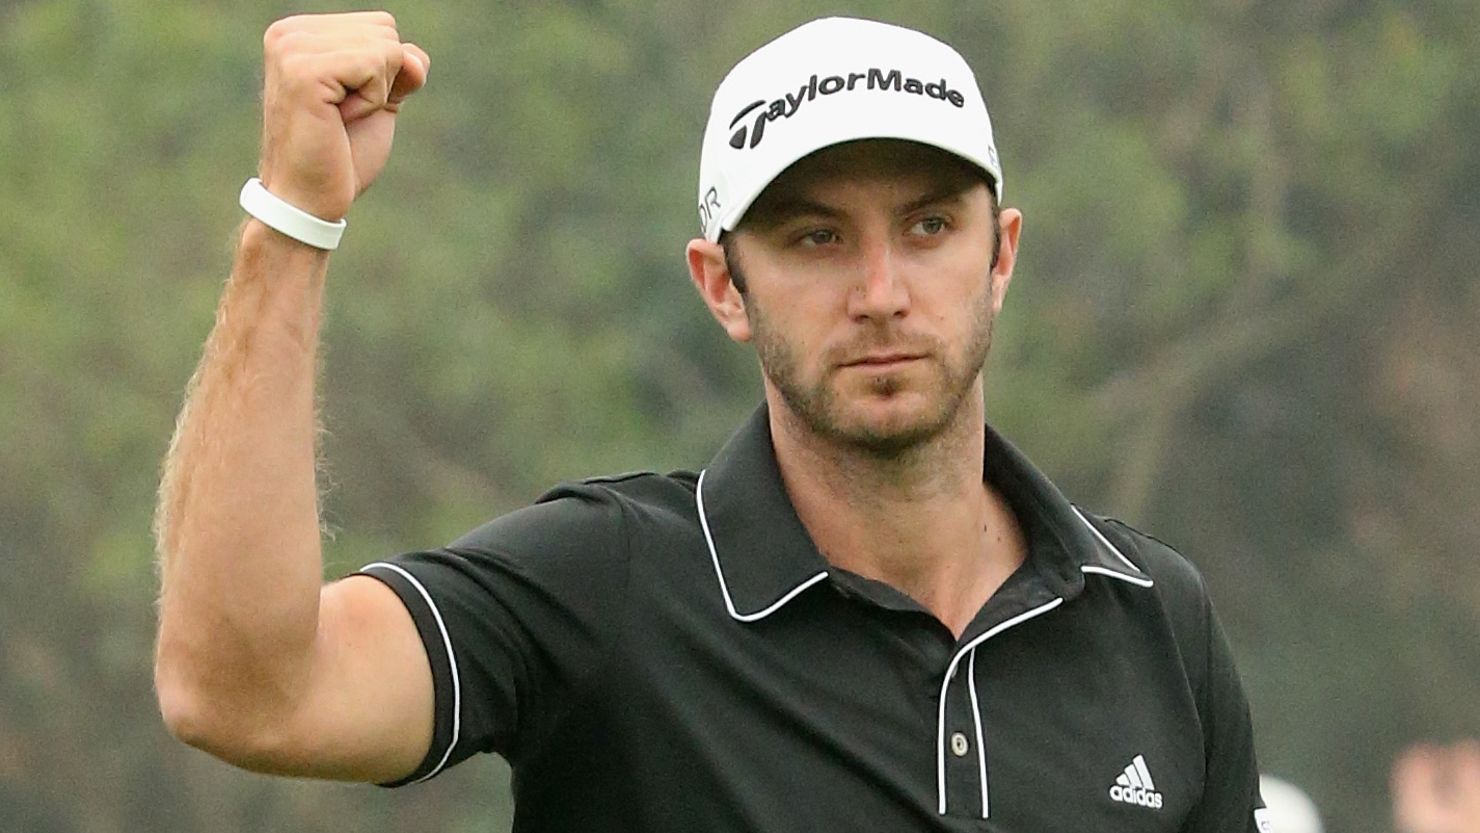 American golfer Dustin Johnson celebrates his crucial chip-in eagle on the 16th hole at the Sheshan International Golf Club.